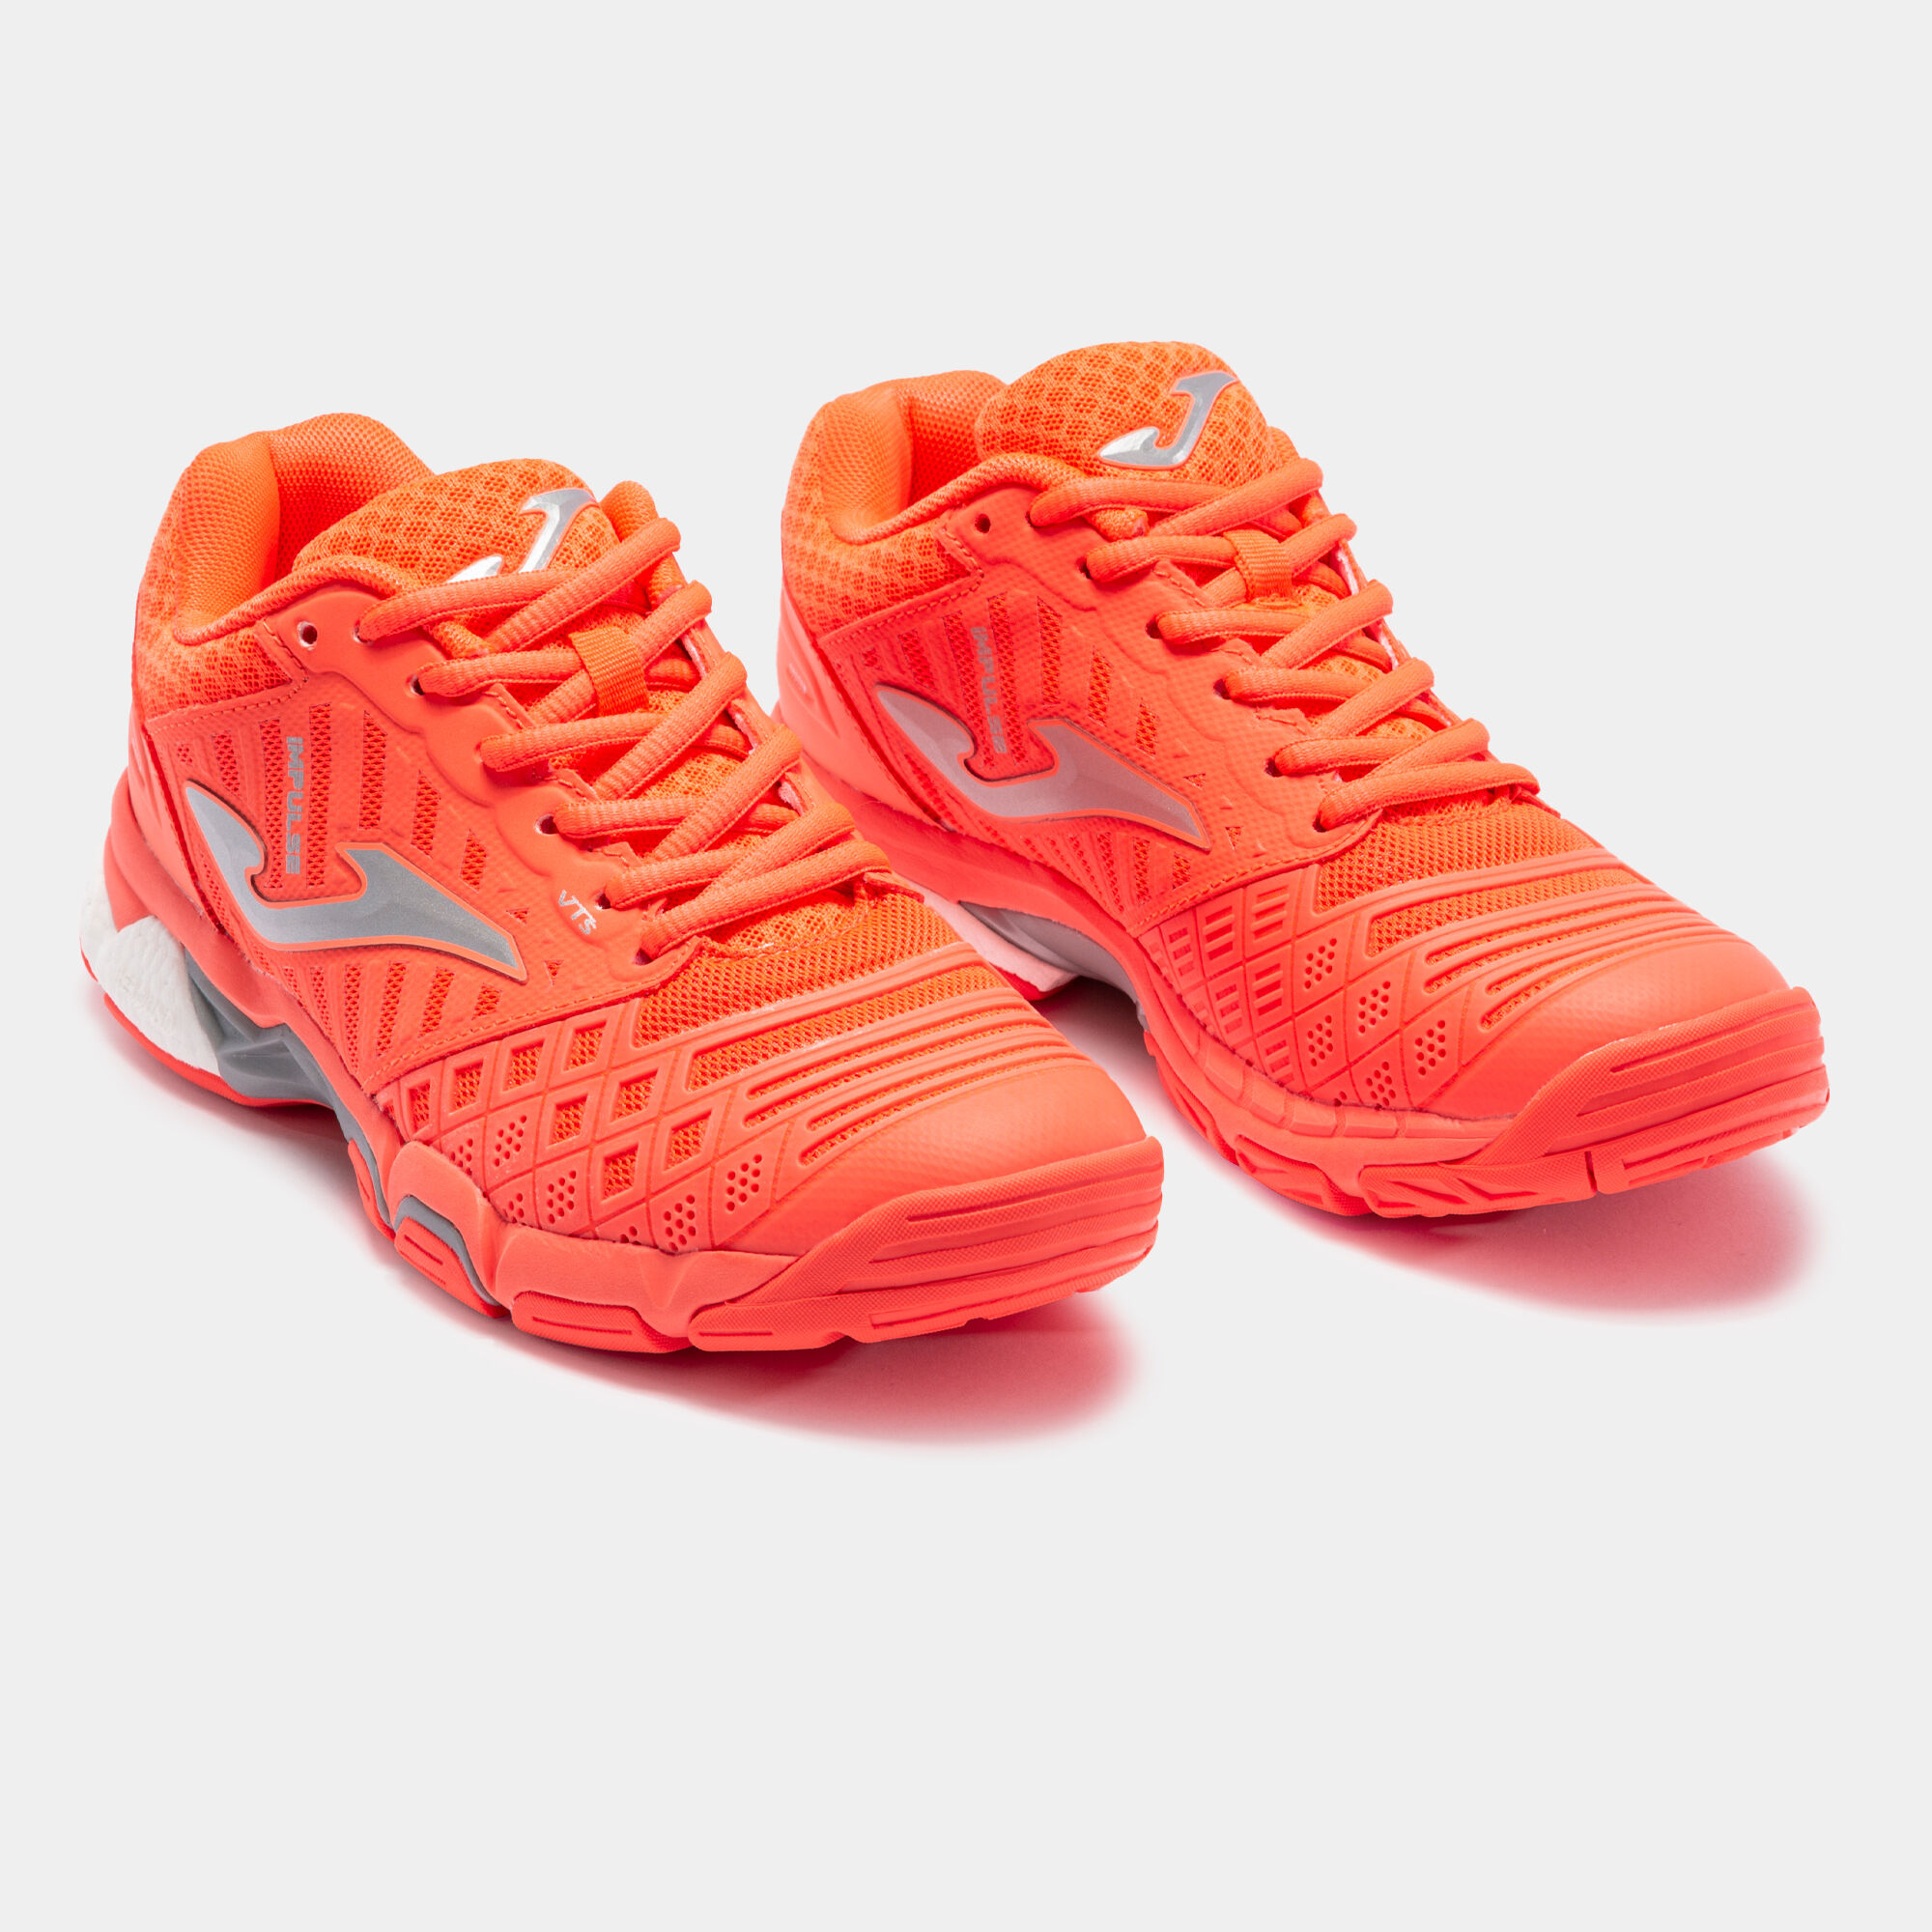 CHAUSSURES VOLLEY-BALL IMPULSE 20 FEMME CORAIL